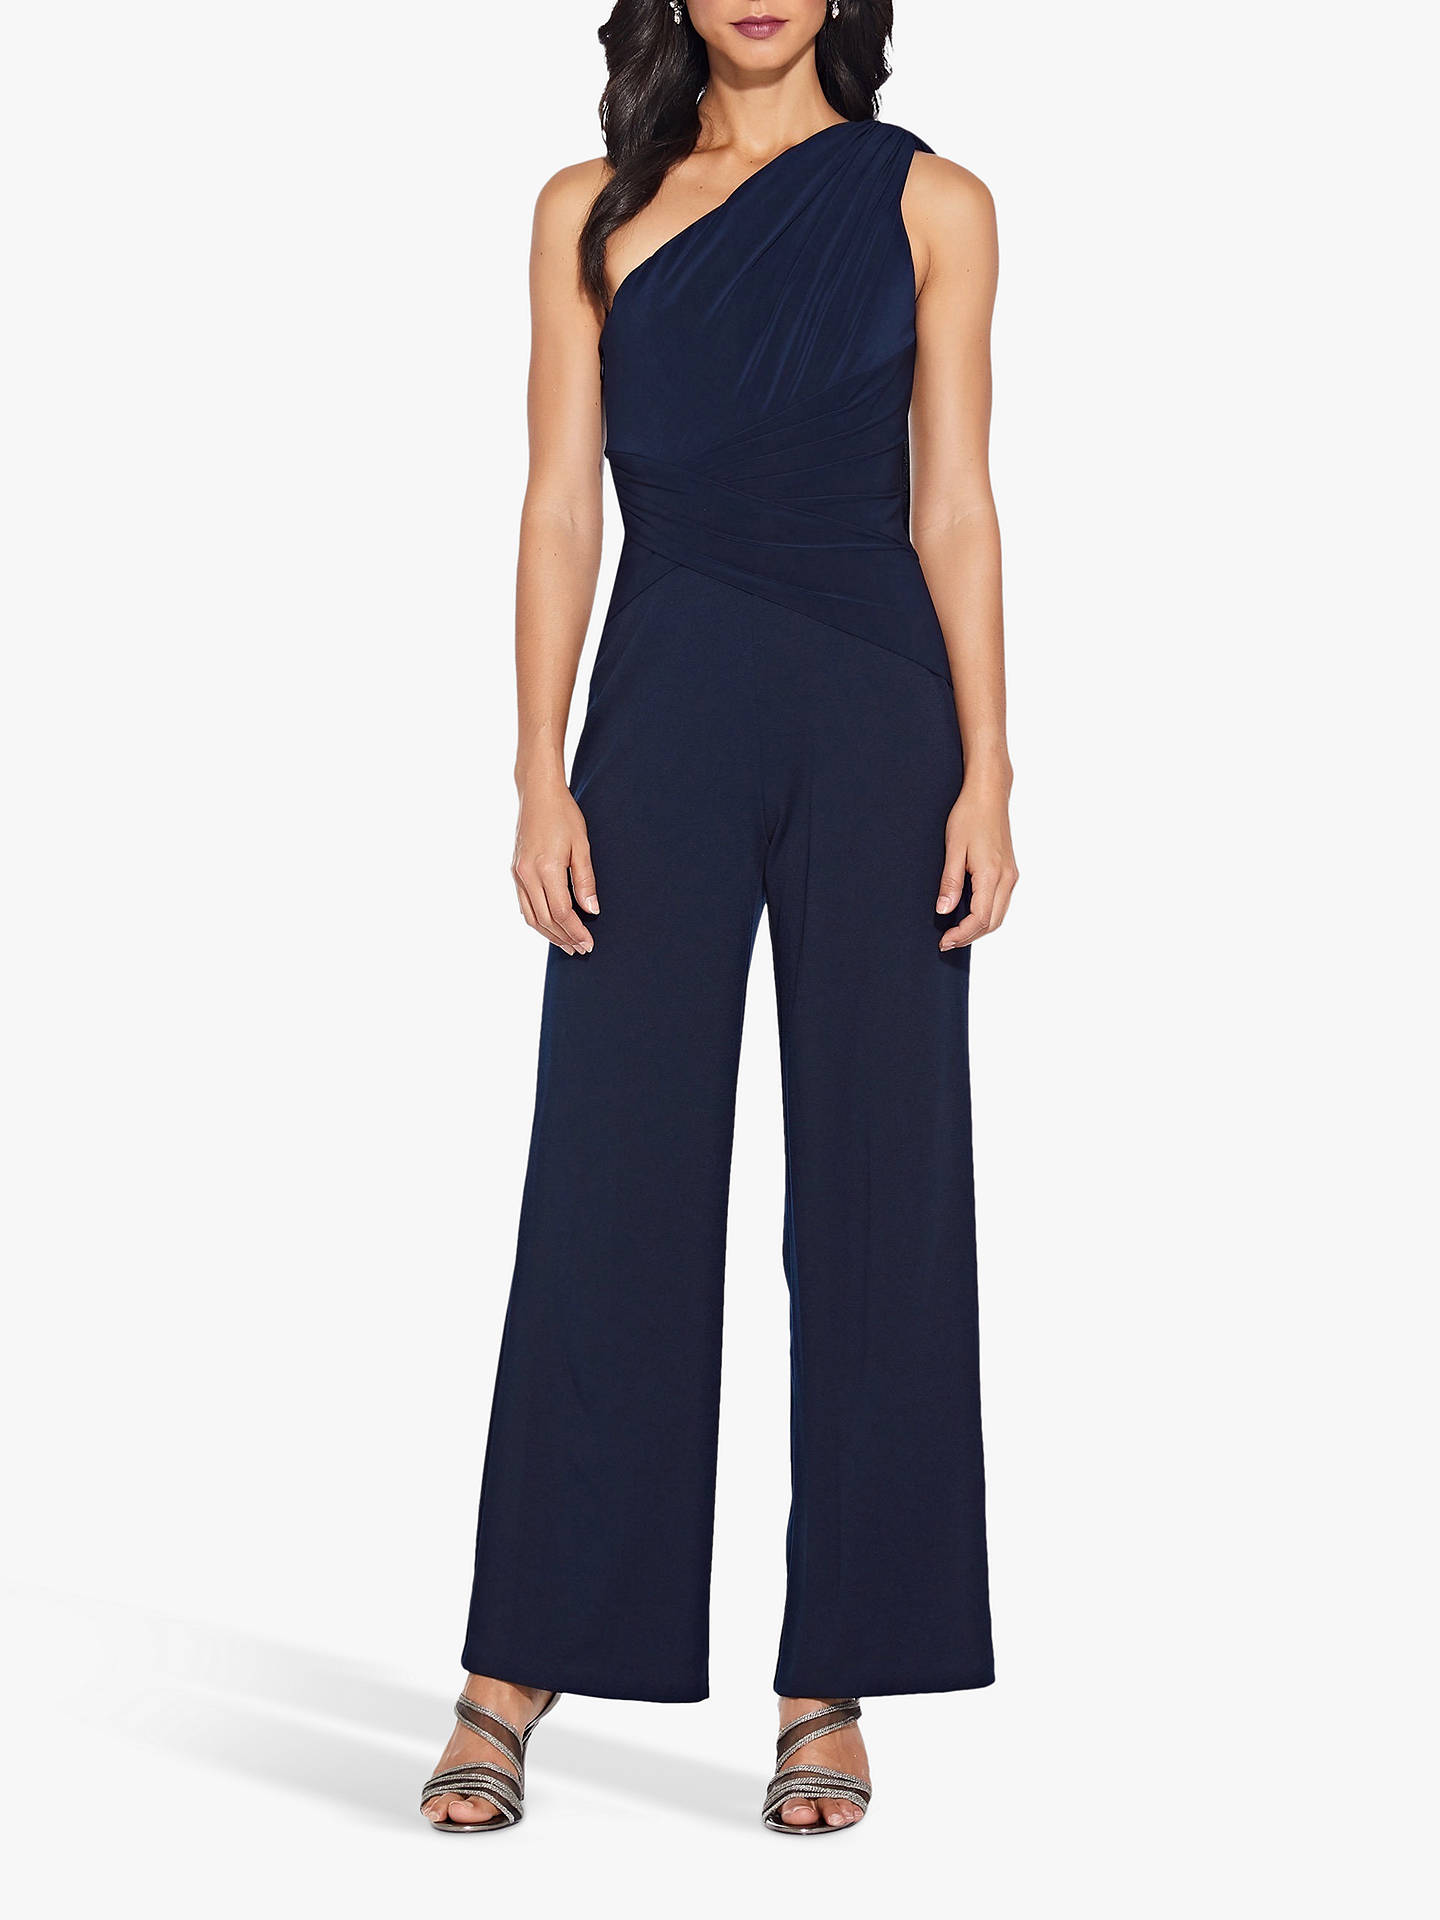 Adrianna Papell One Shoulder Jumpsuit, Midnight at John Lewis & Partners